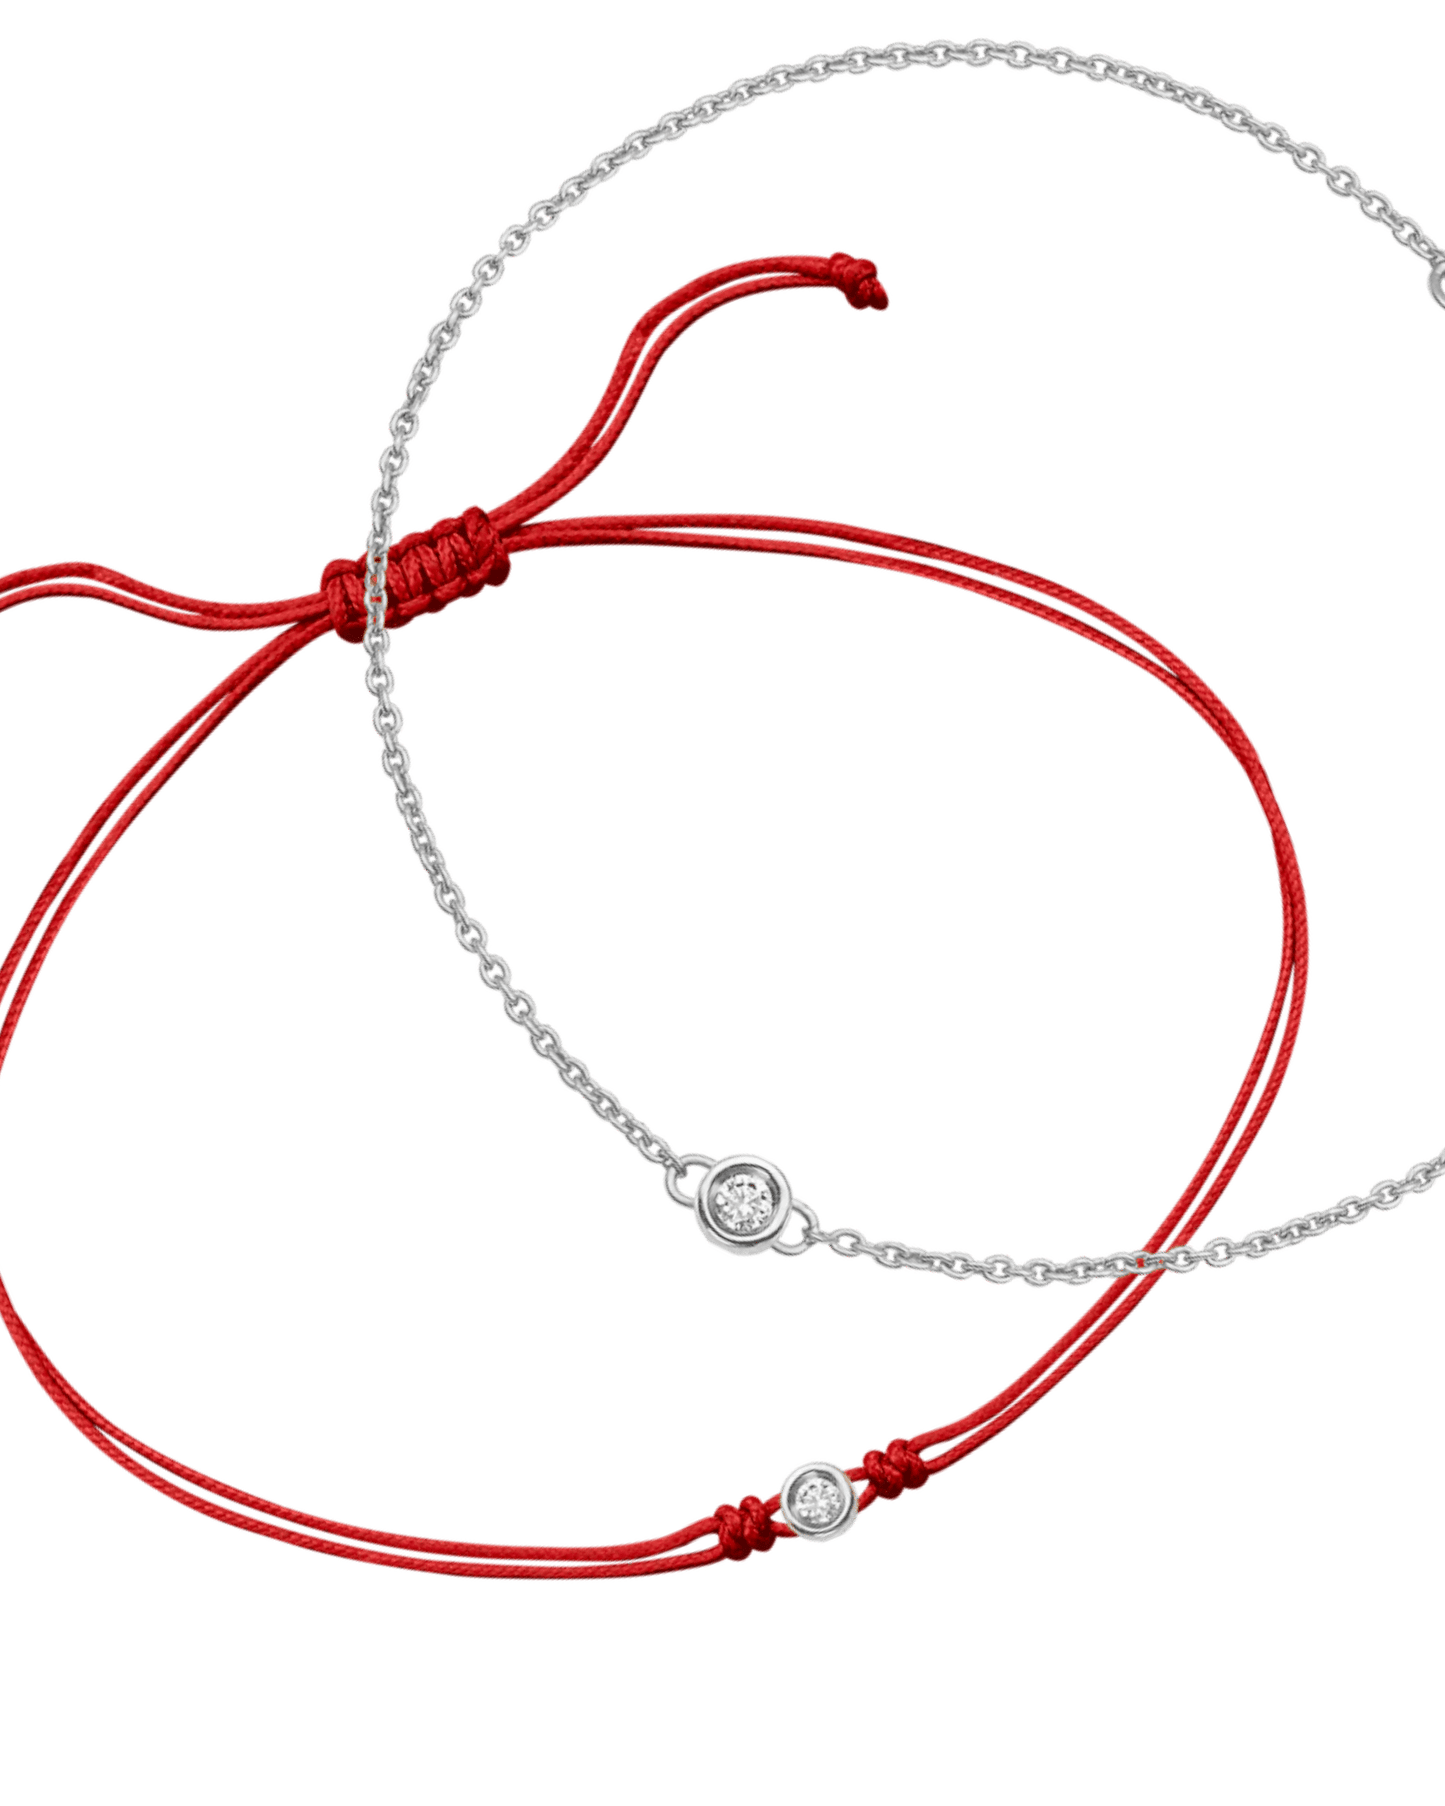 Set of Classic String of Love & Chain of Love - 14K Yellow Gold Bracelets magal-dev 